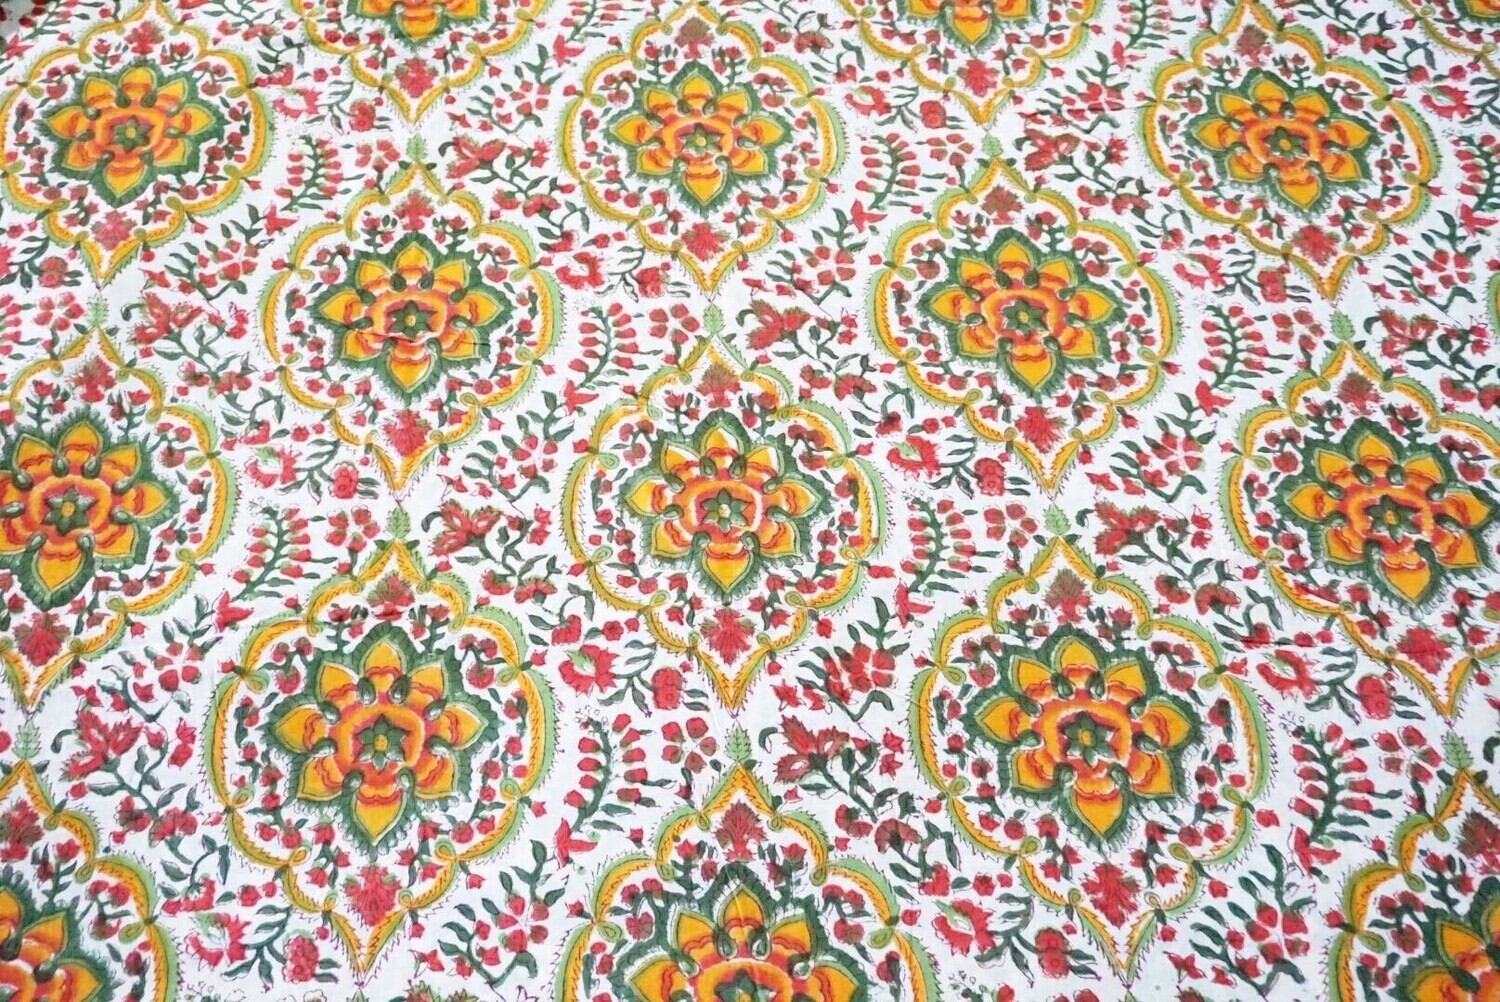 Multi Color Floral Hand Block Print Indian Cotton Fabric for Dress Making, Sewing Quilting Crafting Fabric, 44 Inch Wide, Sold by Half Yard